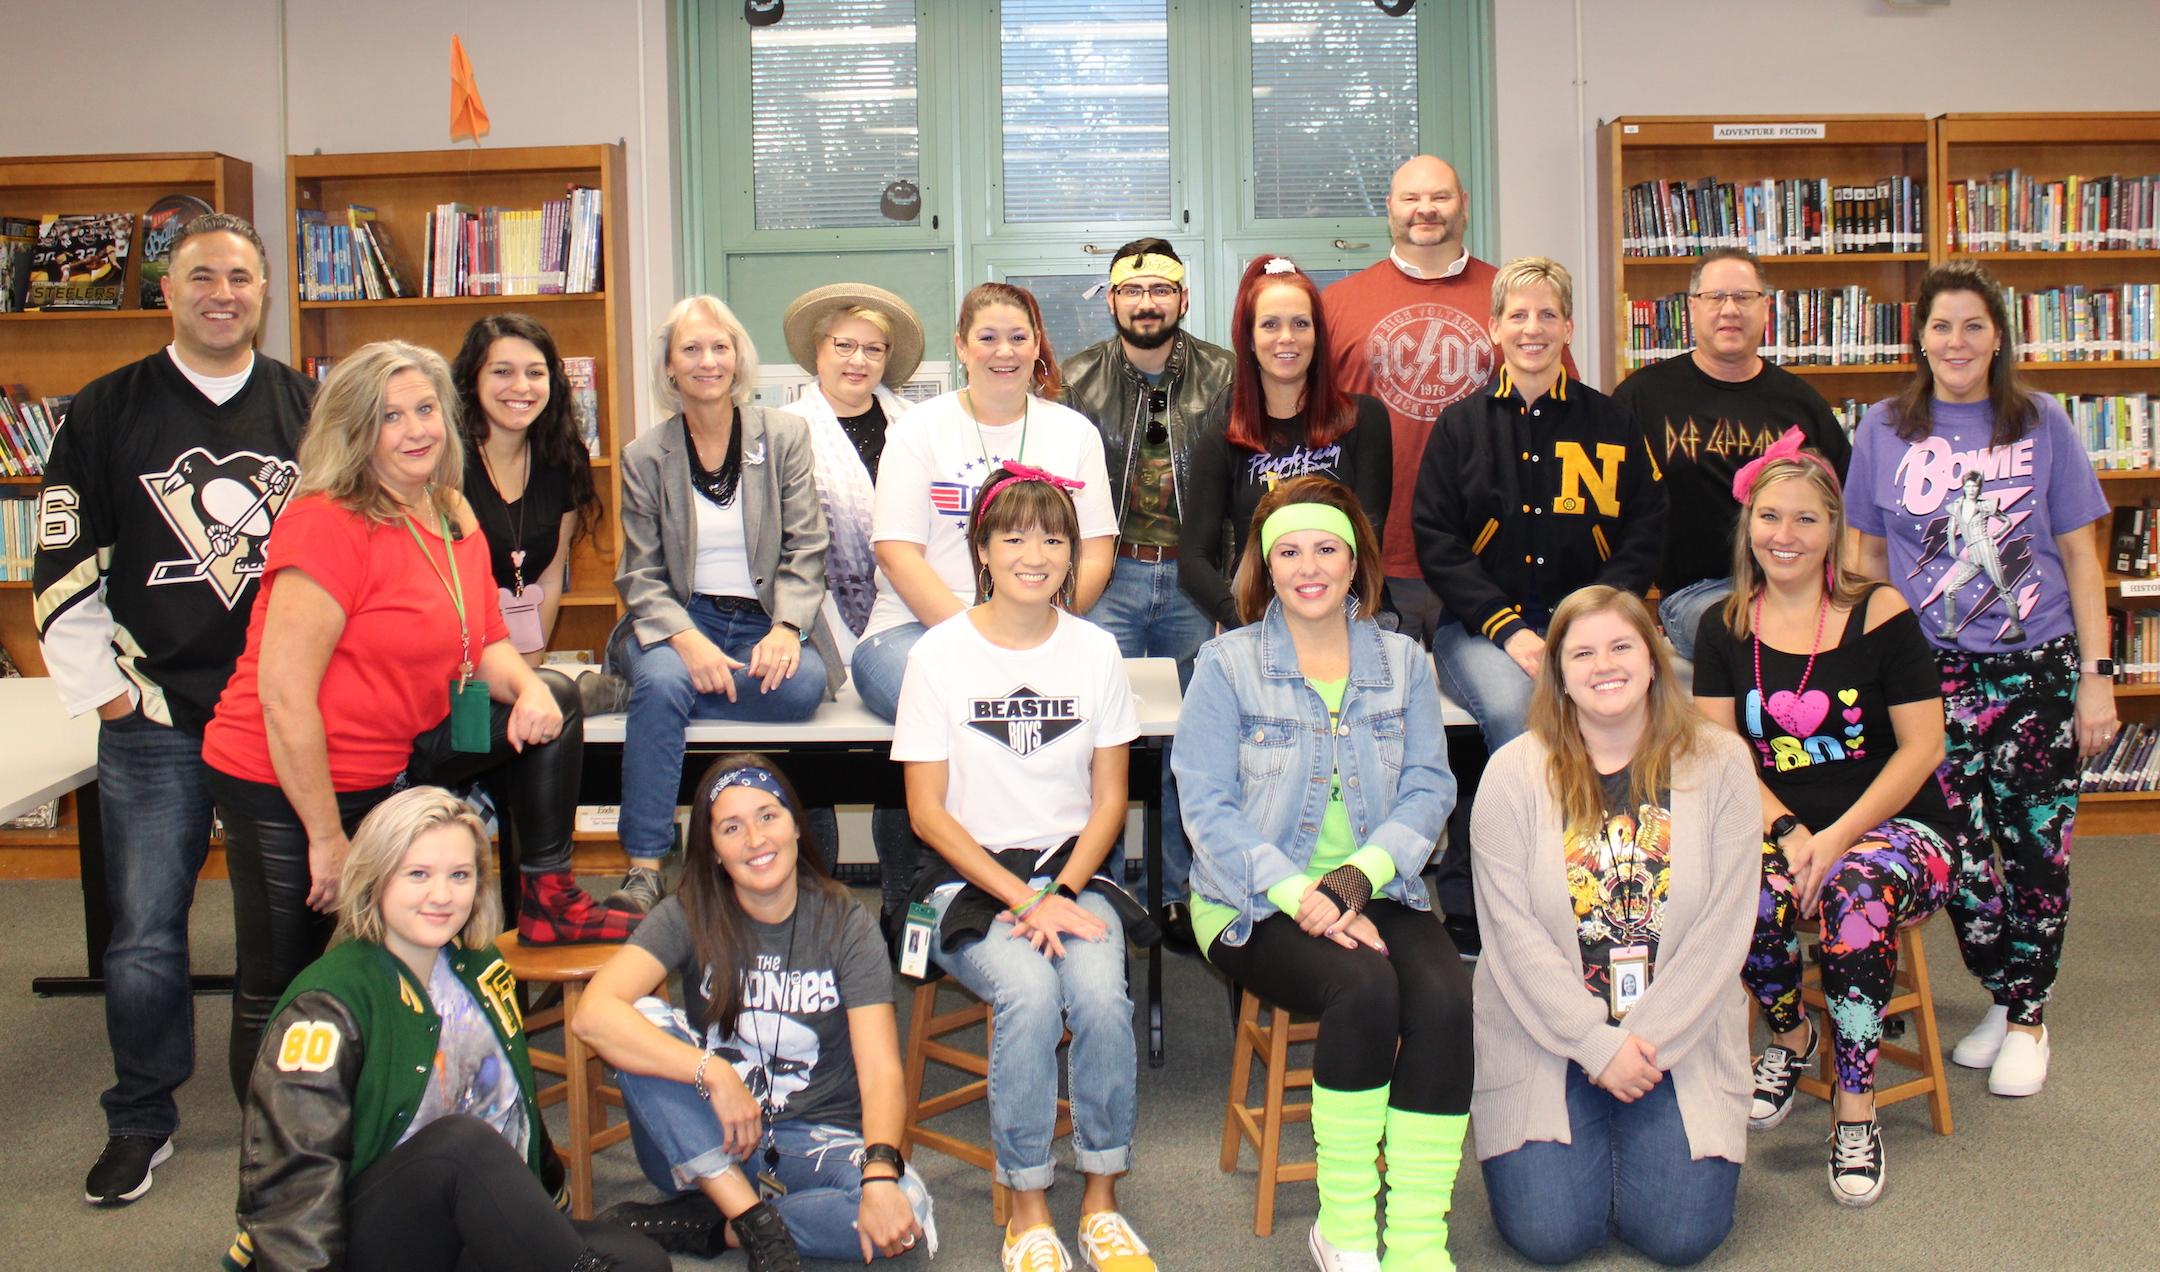 The staff of Trafford Middle School enjoyed the ‘80’s theme day